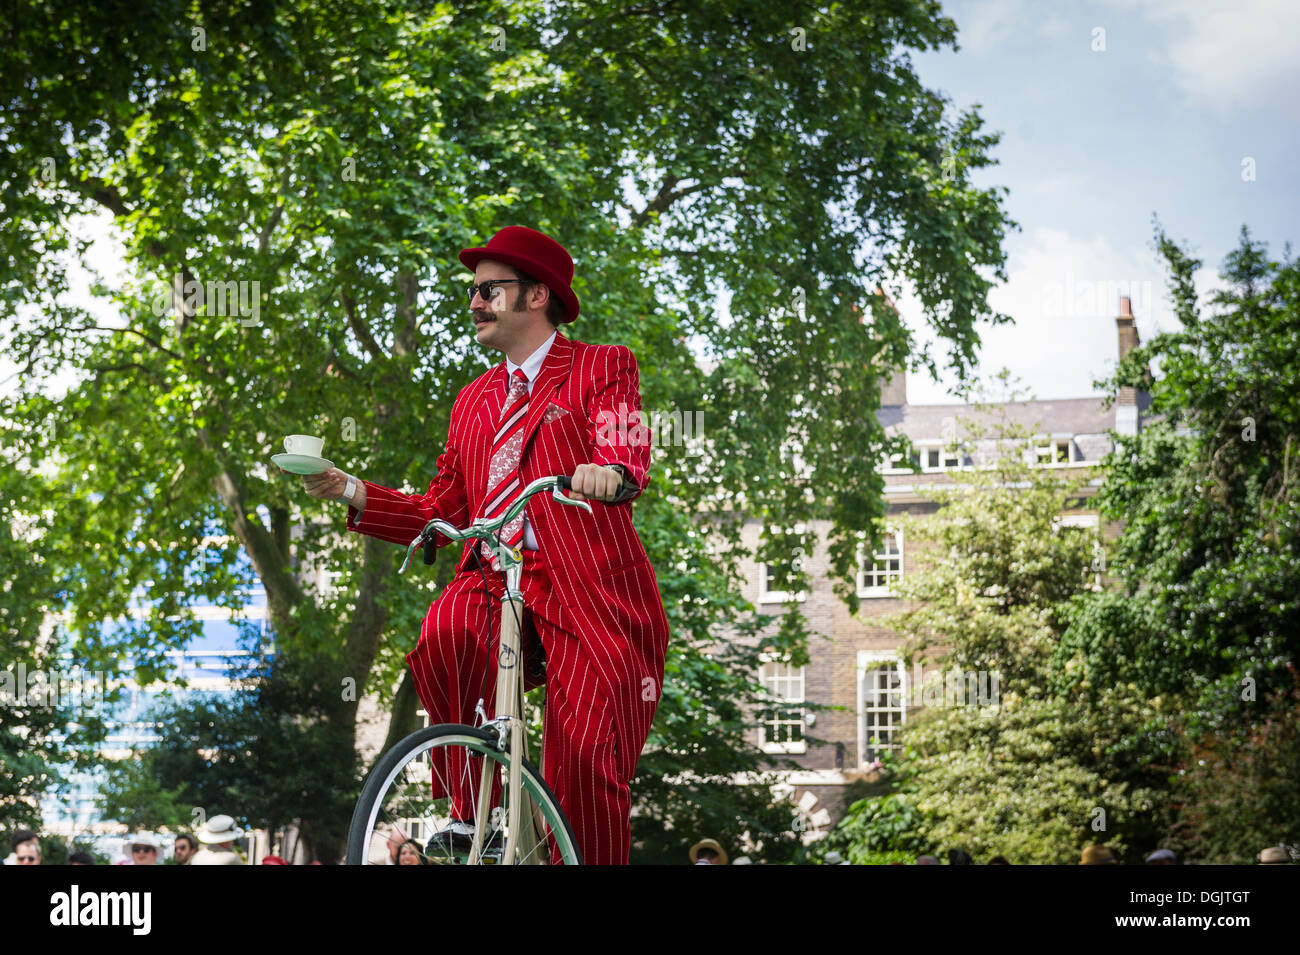 A contestant participating in the Passing of the teacup event in the 2013 Chap Olympiad held in Bedford Square Gardens. Stock Photo